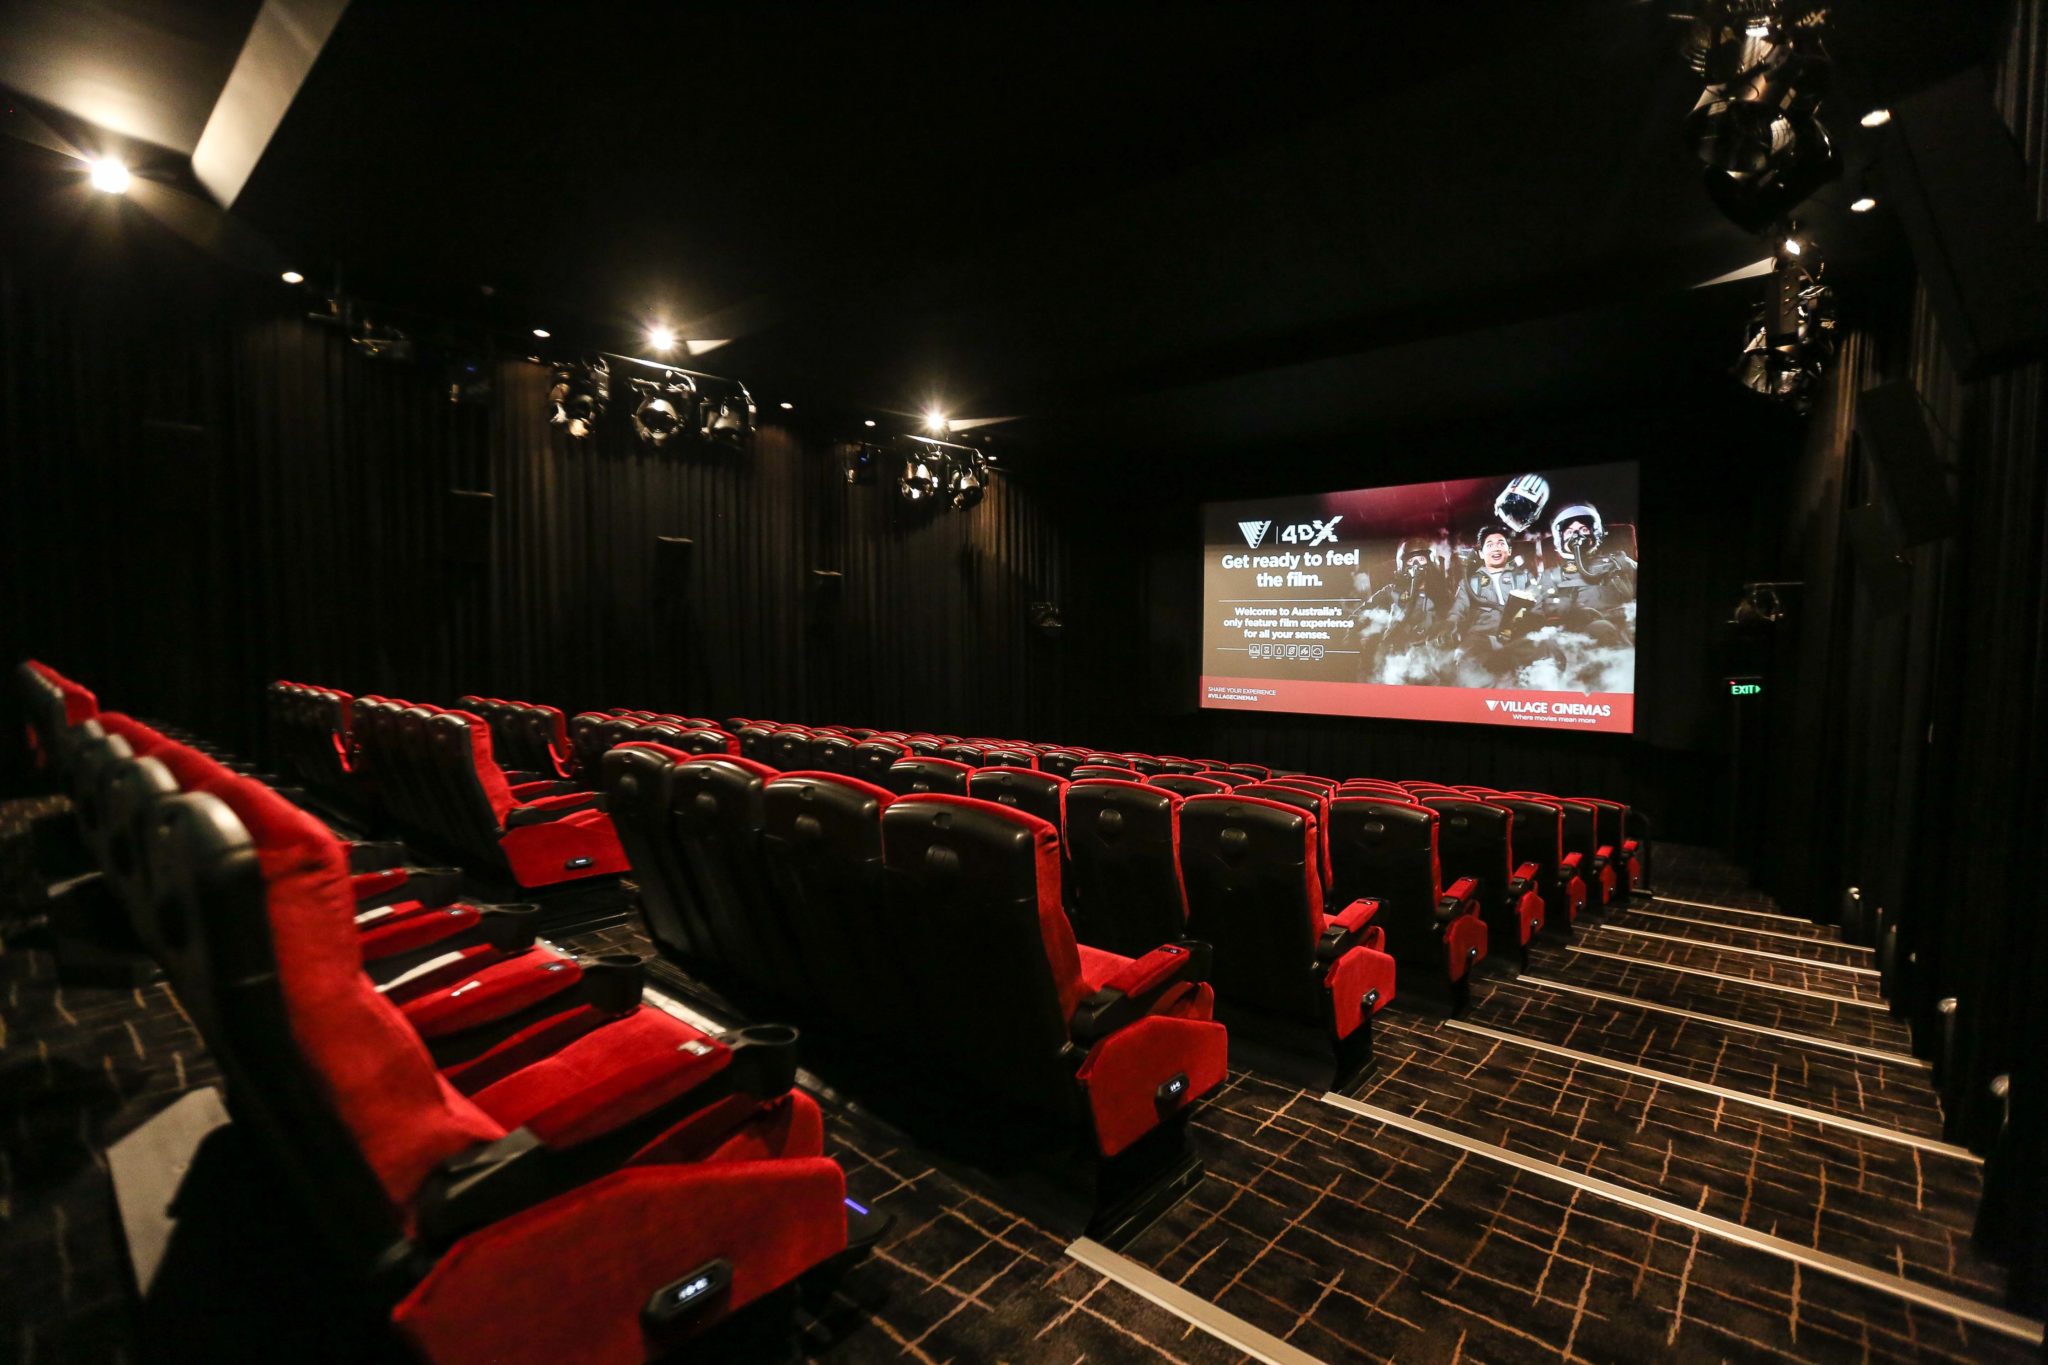 [Video] Regal Is Bringing Atlanta's First 4DX Theater To Atlantic